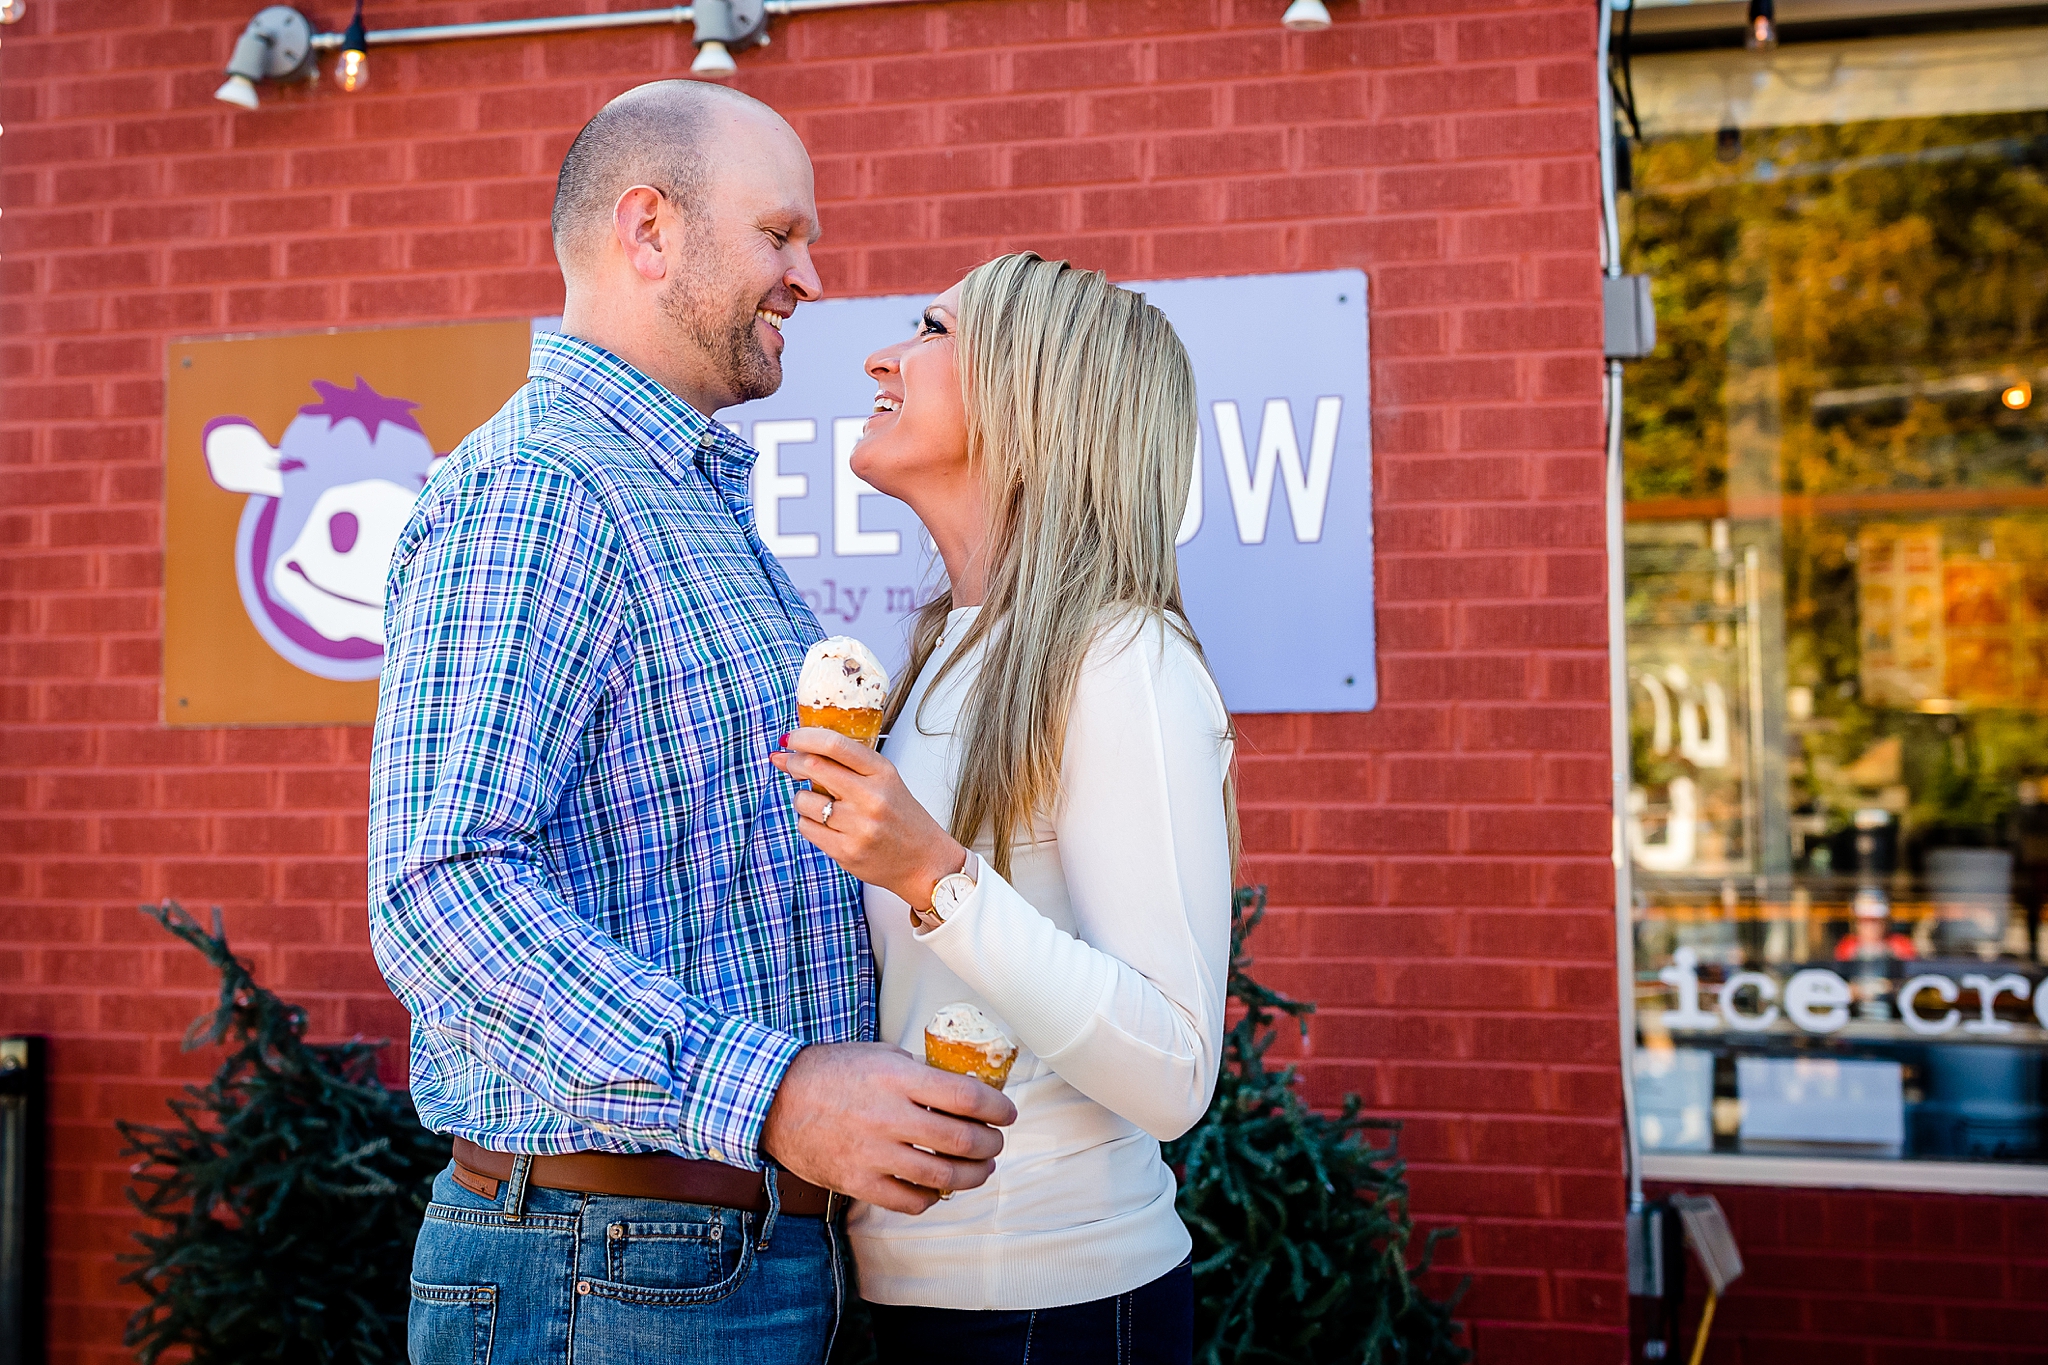 Couple eating ice cream at Sweet Cow during their Colorado engagement session. Kelli & Jason’s Sweet Cow Ice Cream and Davidson Mesa Fall Engagement Session by Colorado Engagement Photographer, Jennifer Garza. Colorado Engagement Photographer, Colorado Engagement Photography, Sweet Cow Engagement Session, Davidson Mesa Engagement Session, Colorado Fall Engagement Photos, Fall Engagement Photography, Mountain Engagement Photographer, Colorado Wedding, Colorado Bride, MagMod